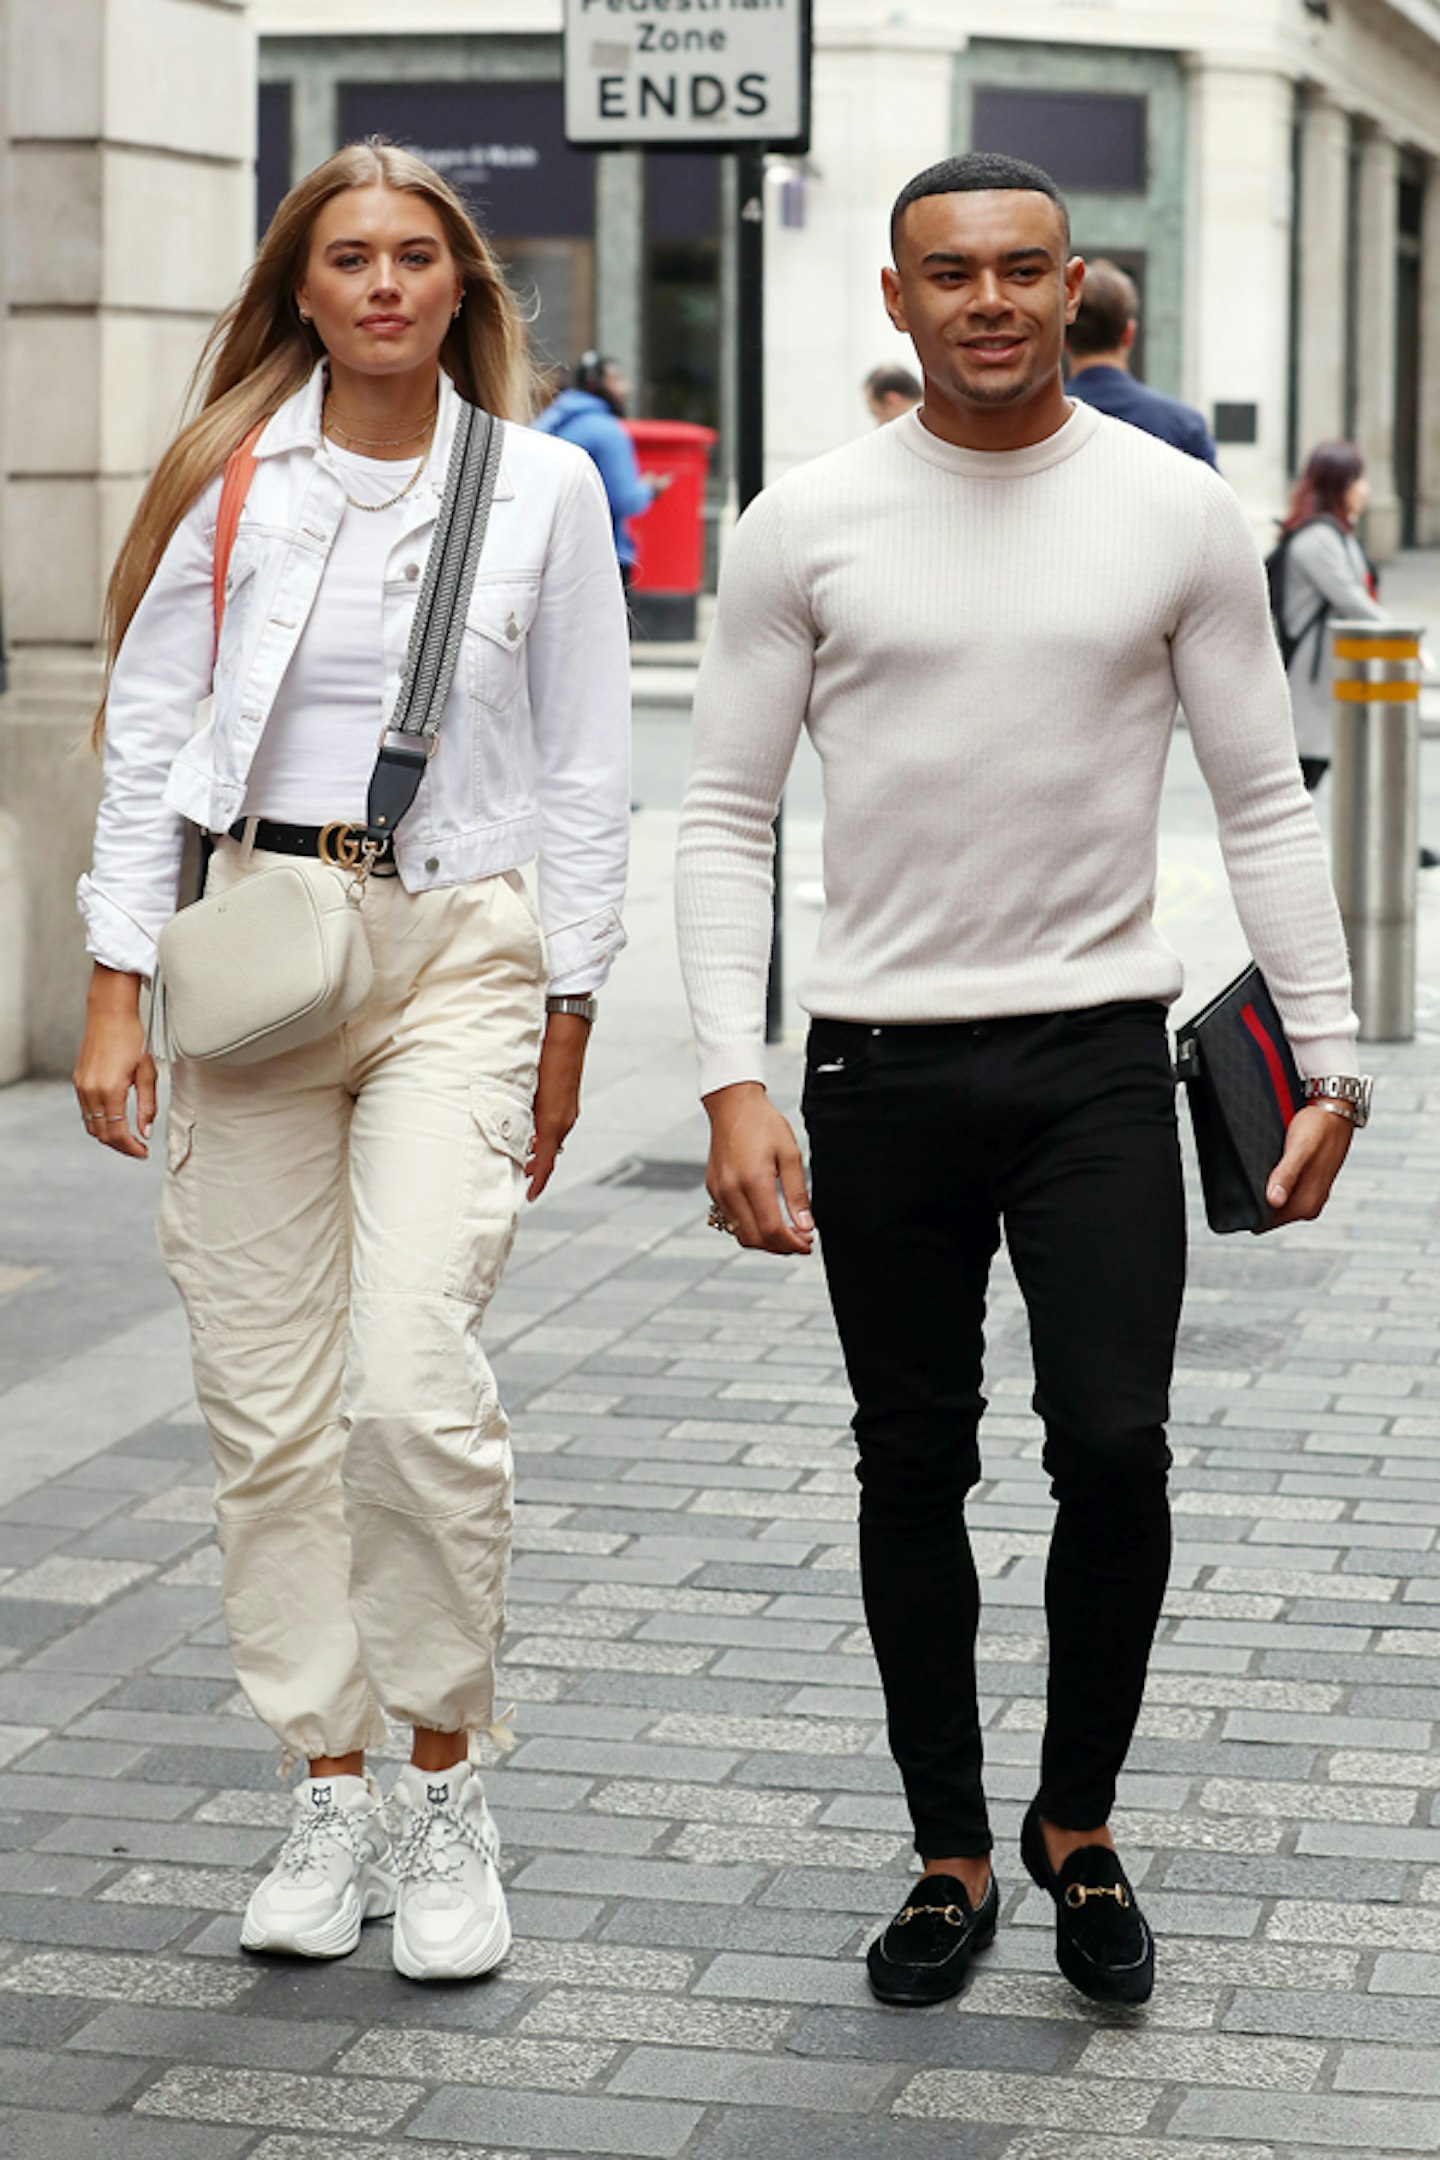 Love Island's Arabella Chi and Wes Nelson